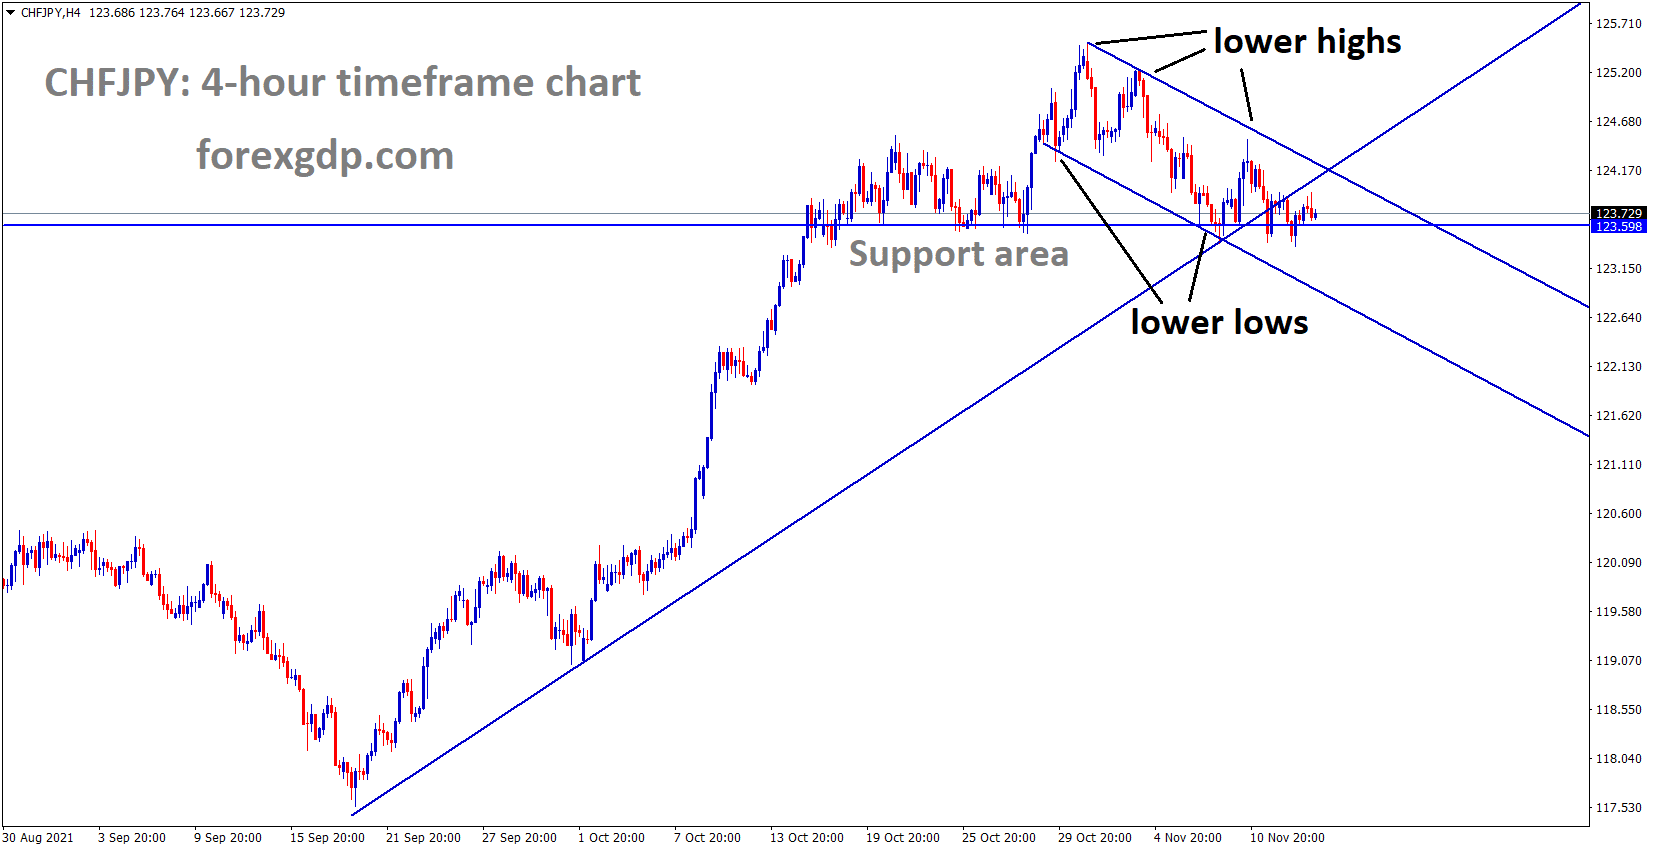 CHFJPY has reached the Previous support area and has broken the higher low area